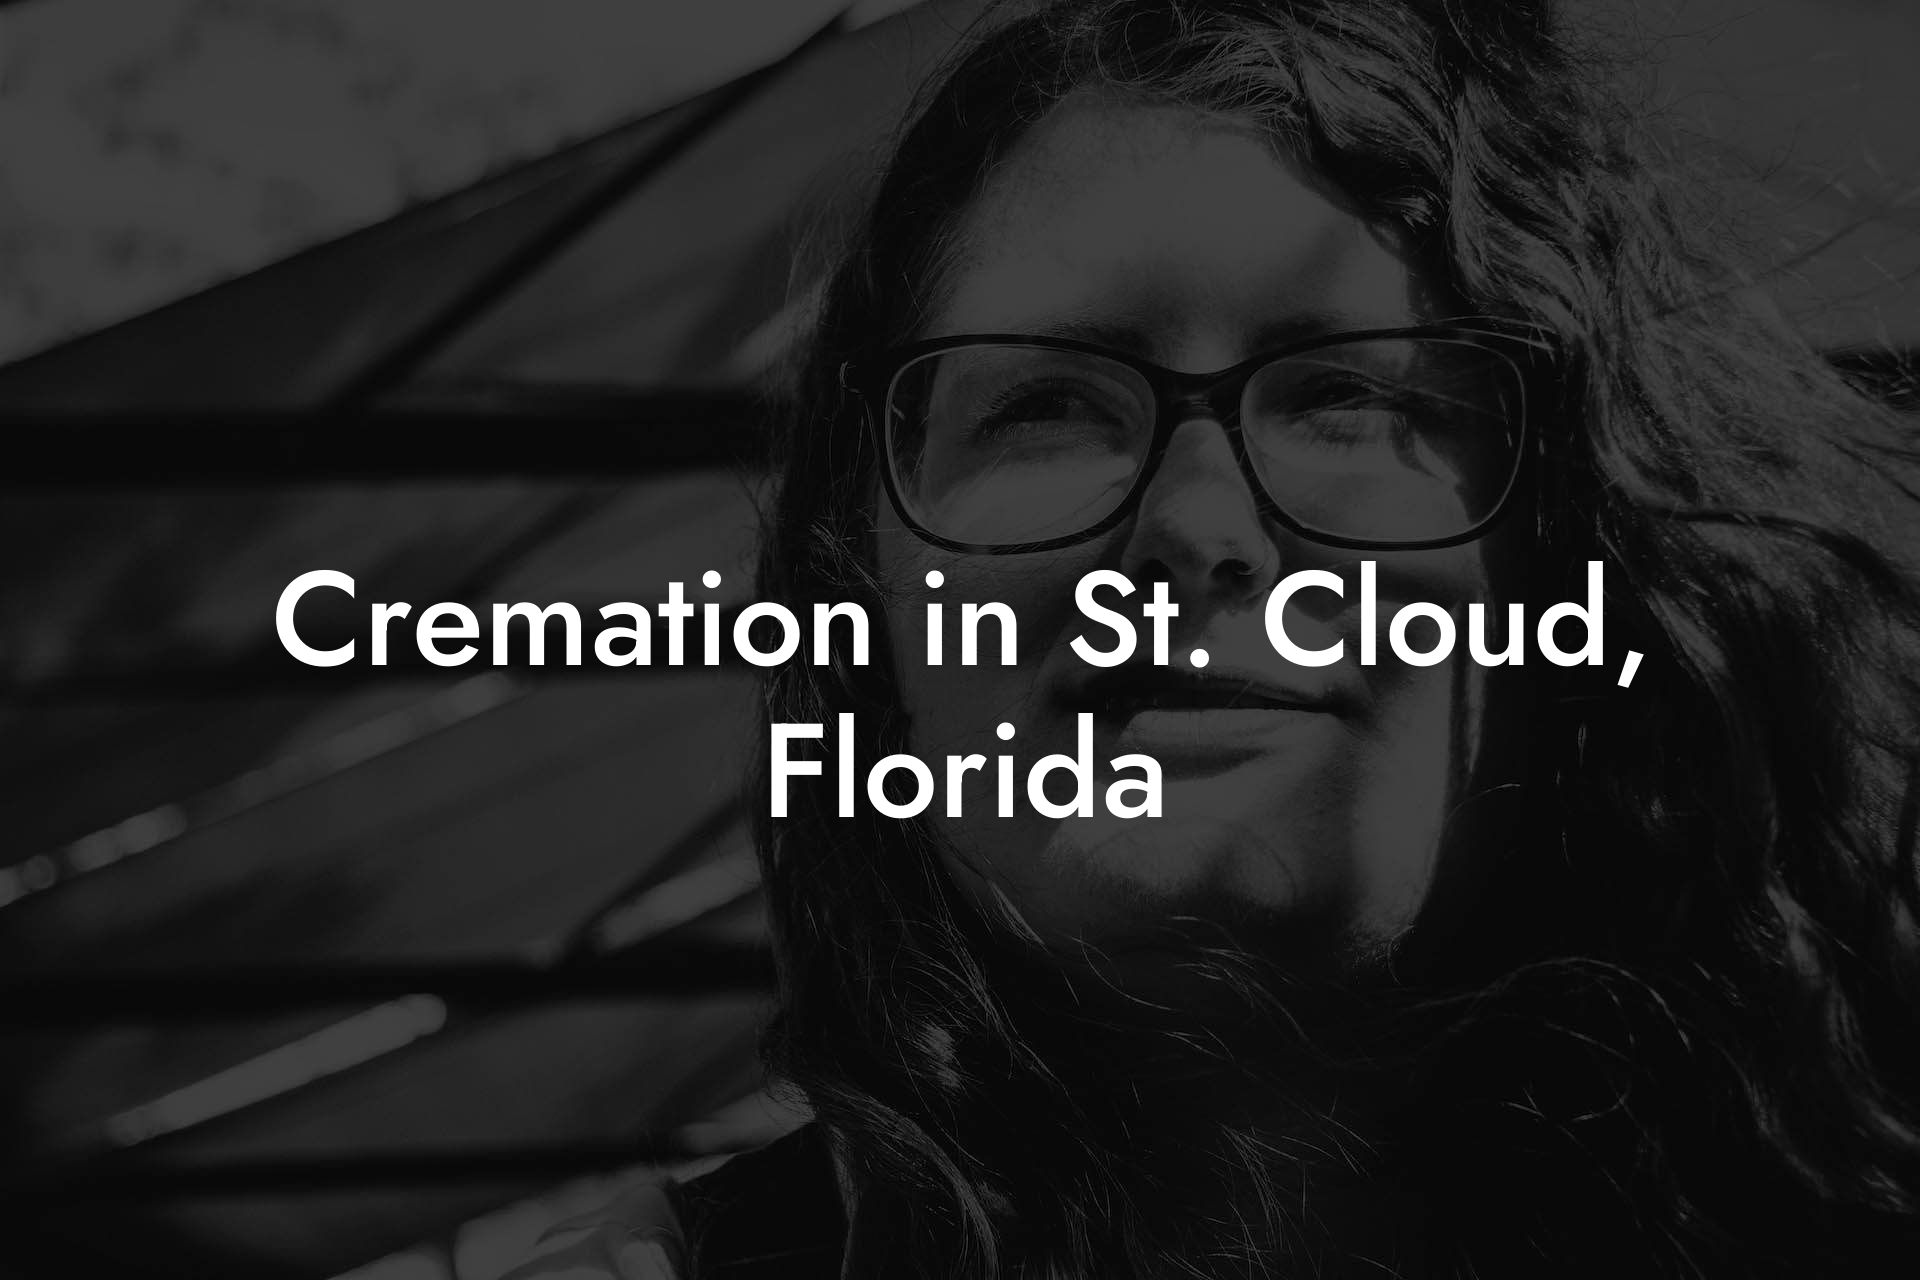 Cremation in St. Cloud, Florida